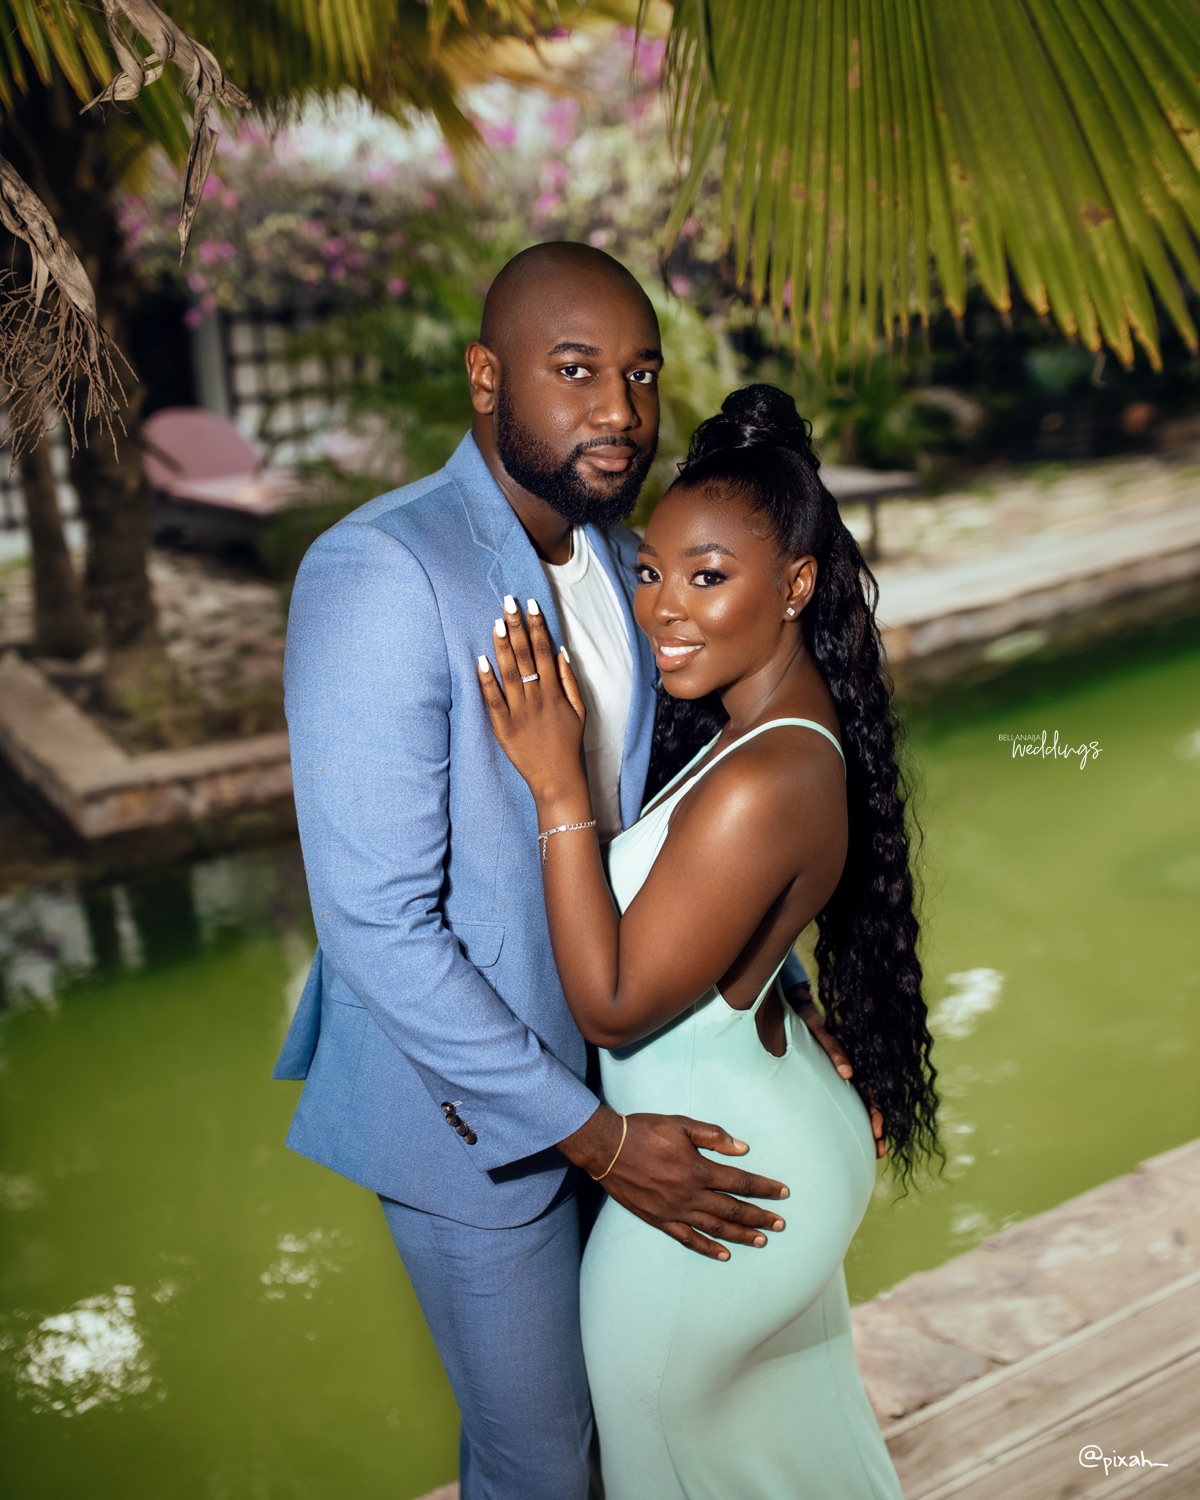 Abena and Andre: Enjoy these stunning photos of this beautiful Ghanaian lovebirds